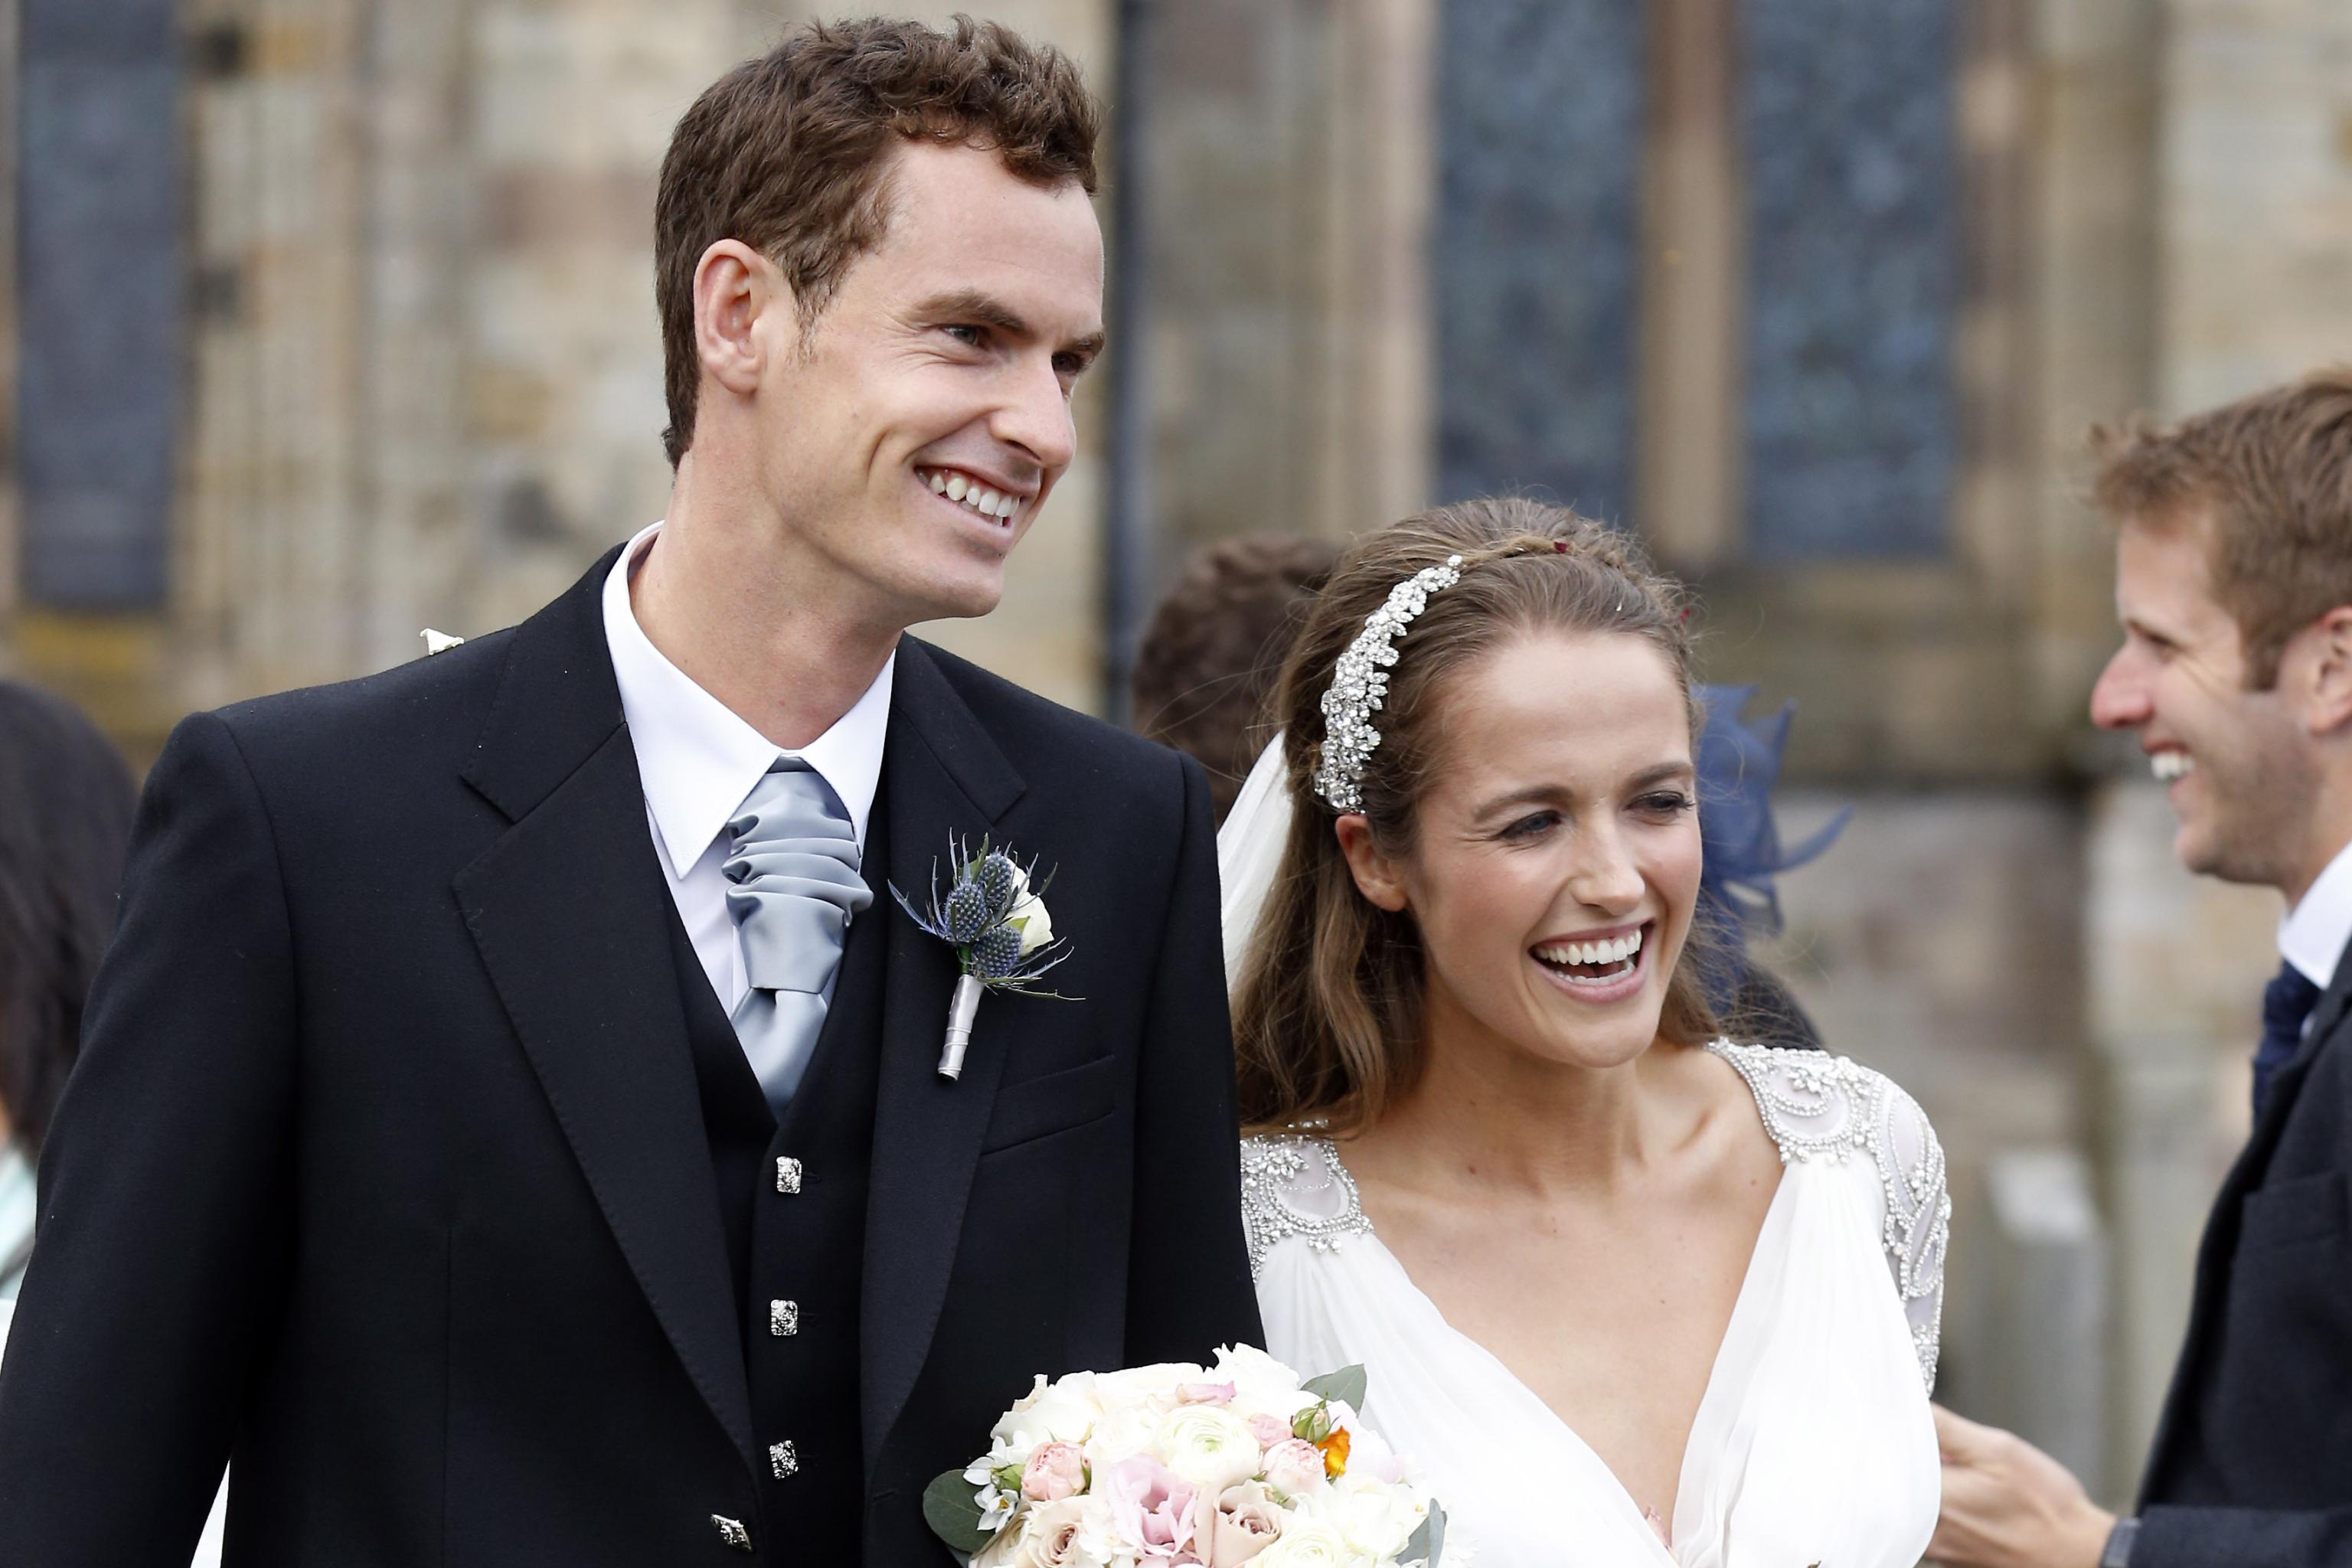 Andy Murray Kim Sears Wedding Attendees Photos Location And Details Bleacher Report Latest News Videos And Highlights